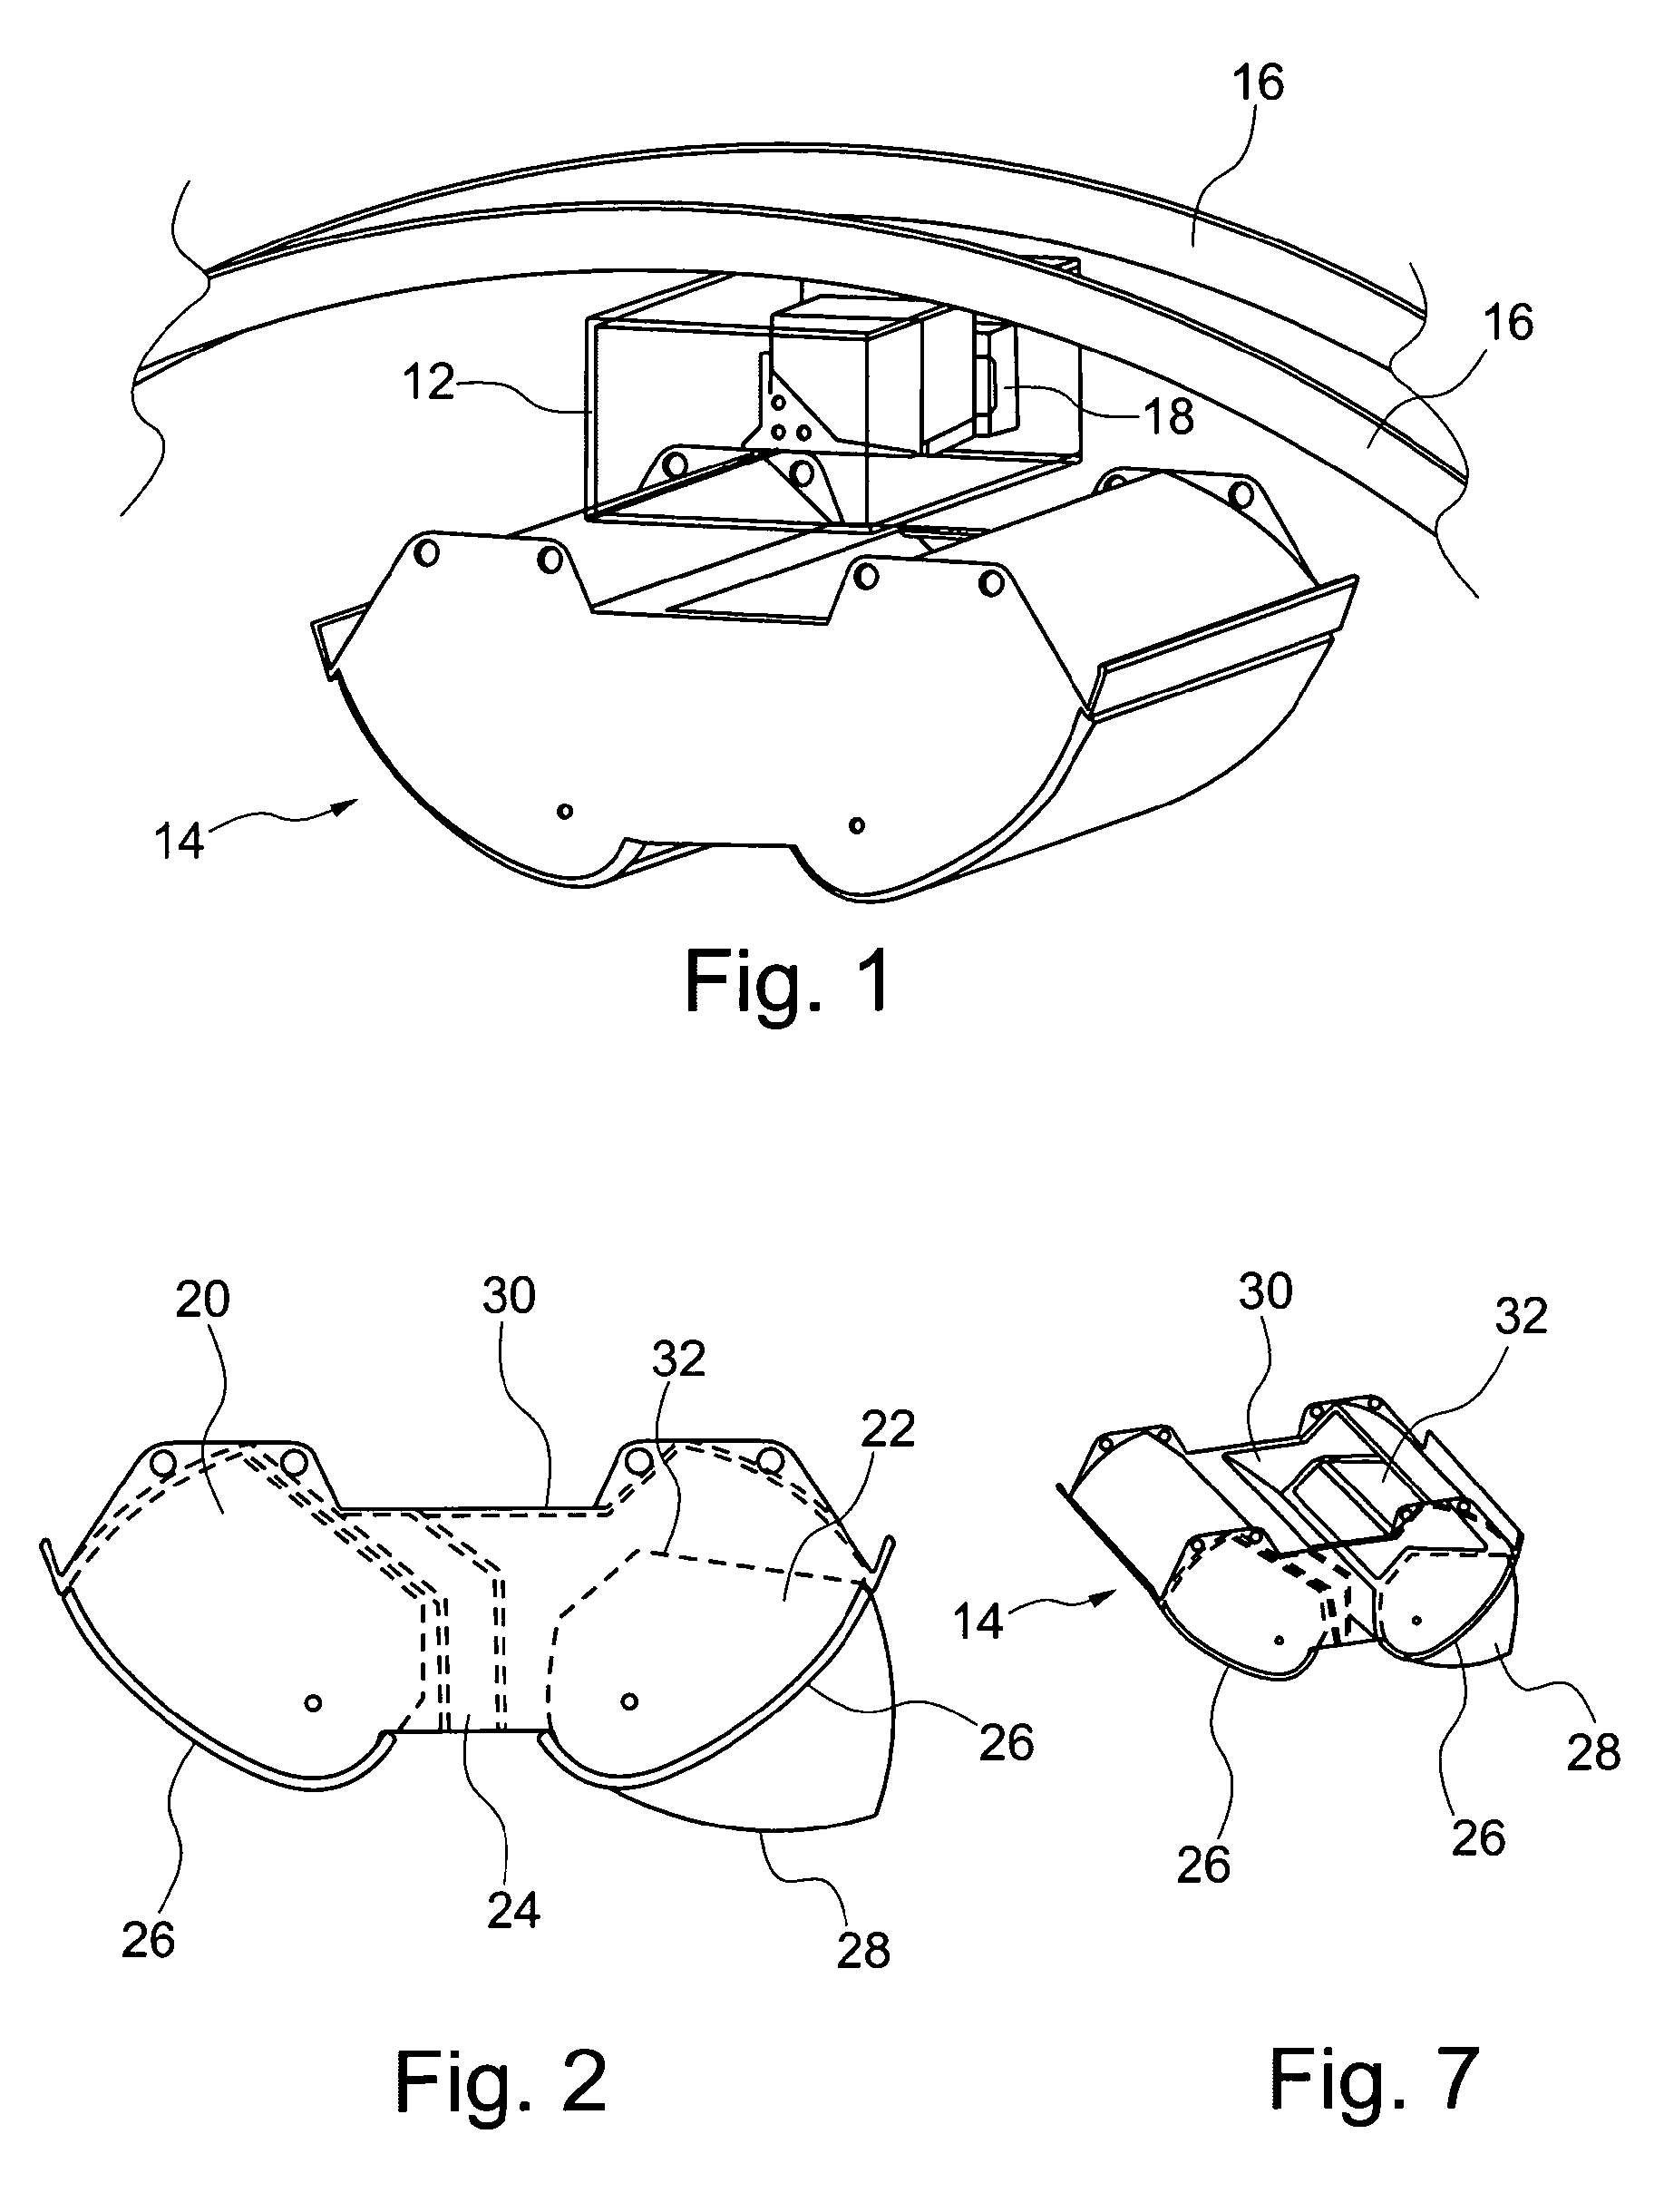 Pivoting equipment carrier in combination with a modified luggage rack